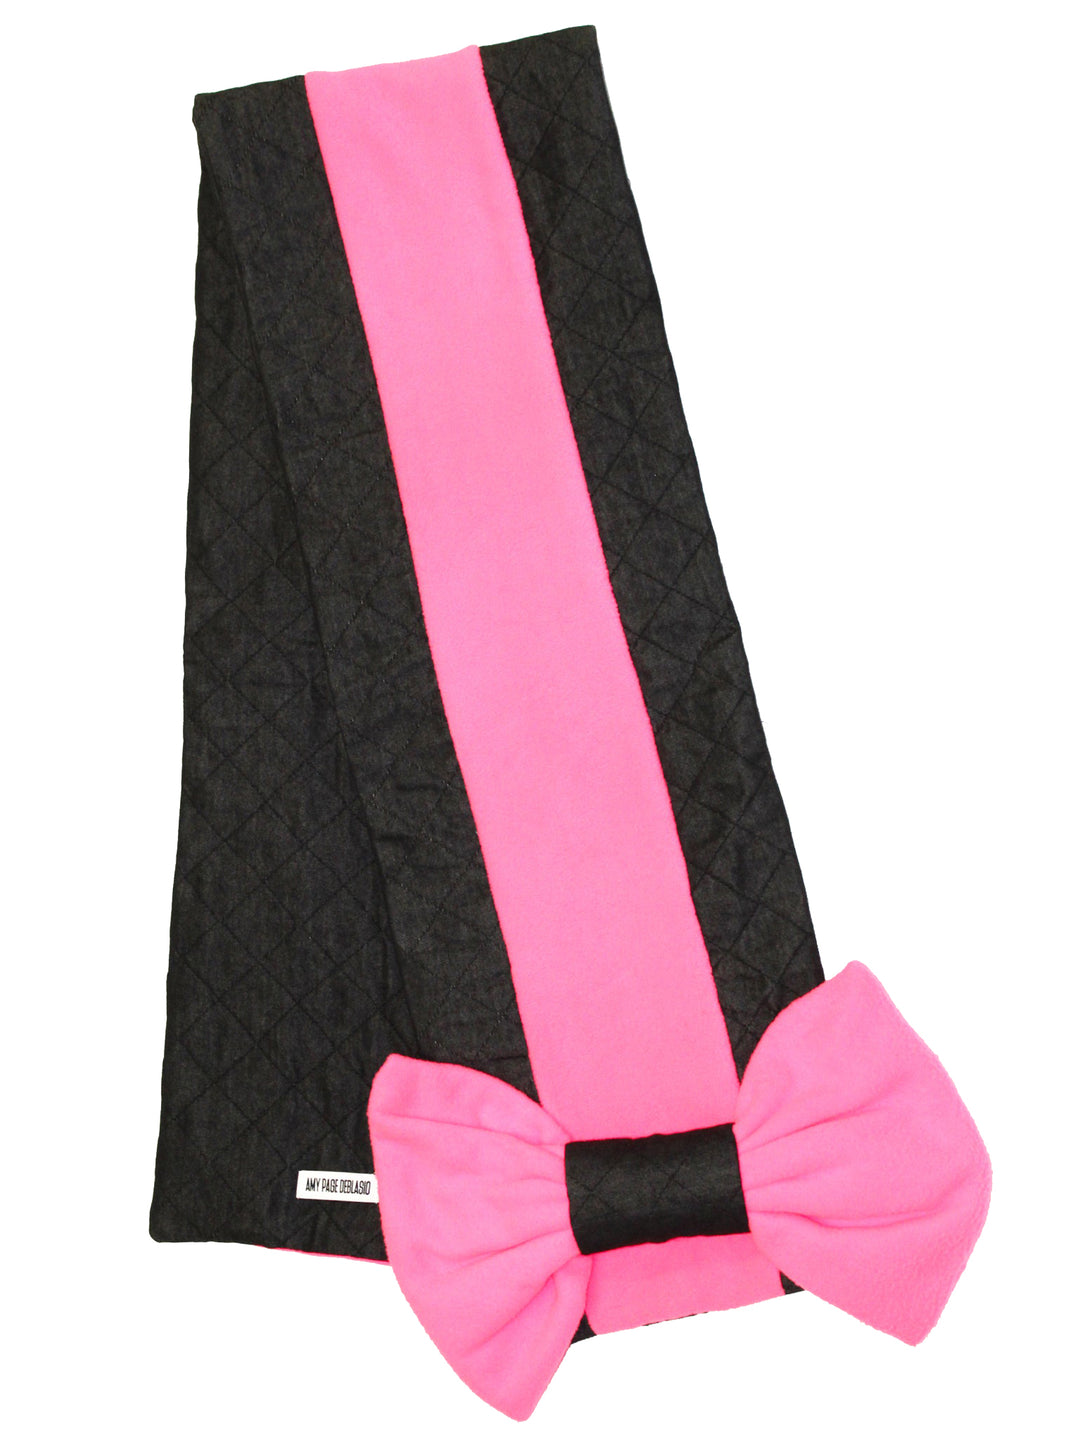 Black and Neon Pink Bow Scarf (30% OFF)